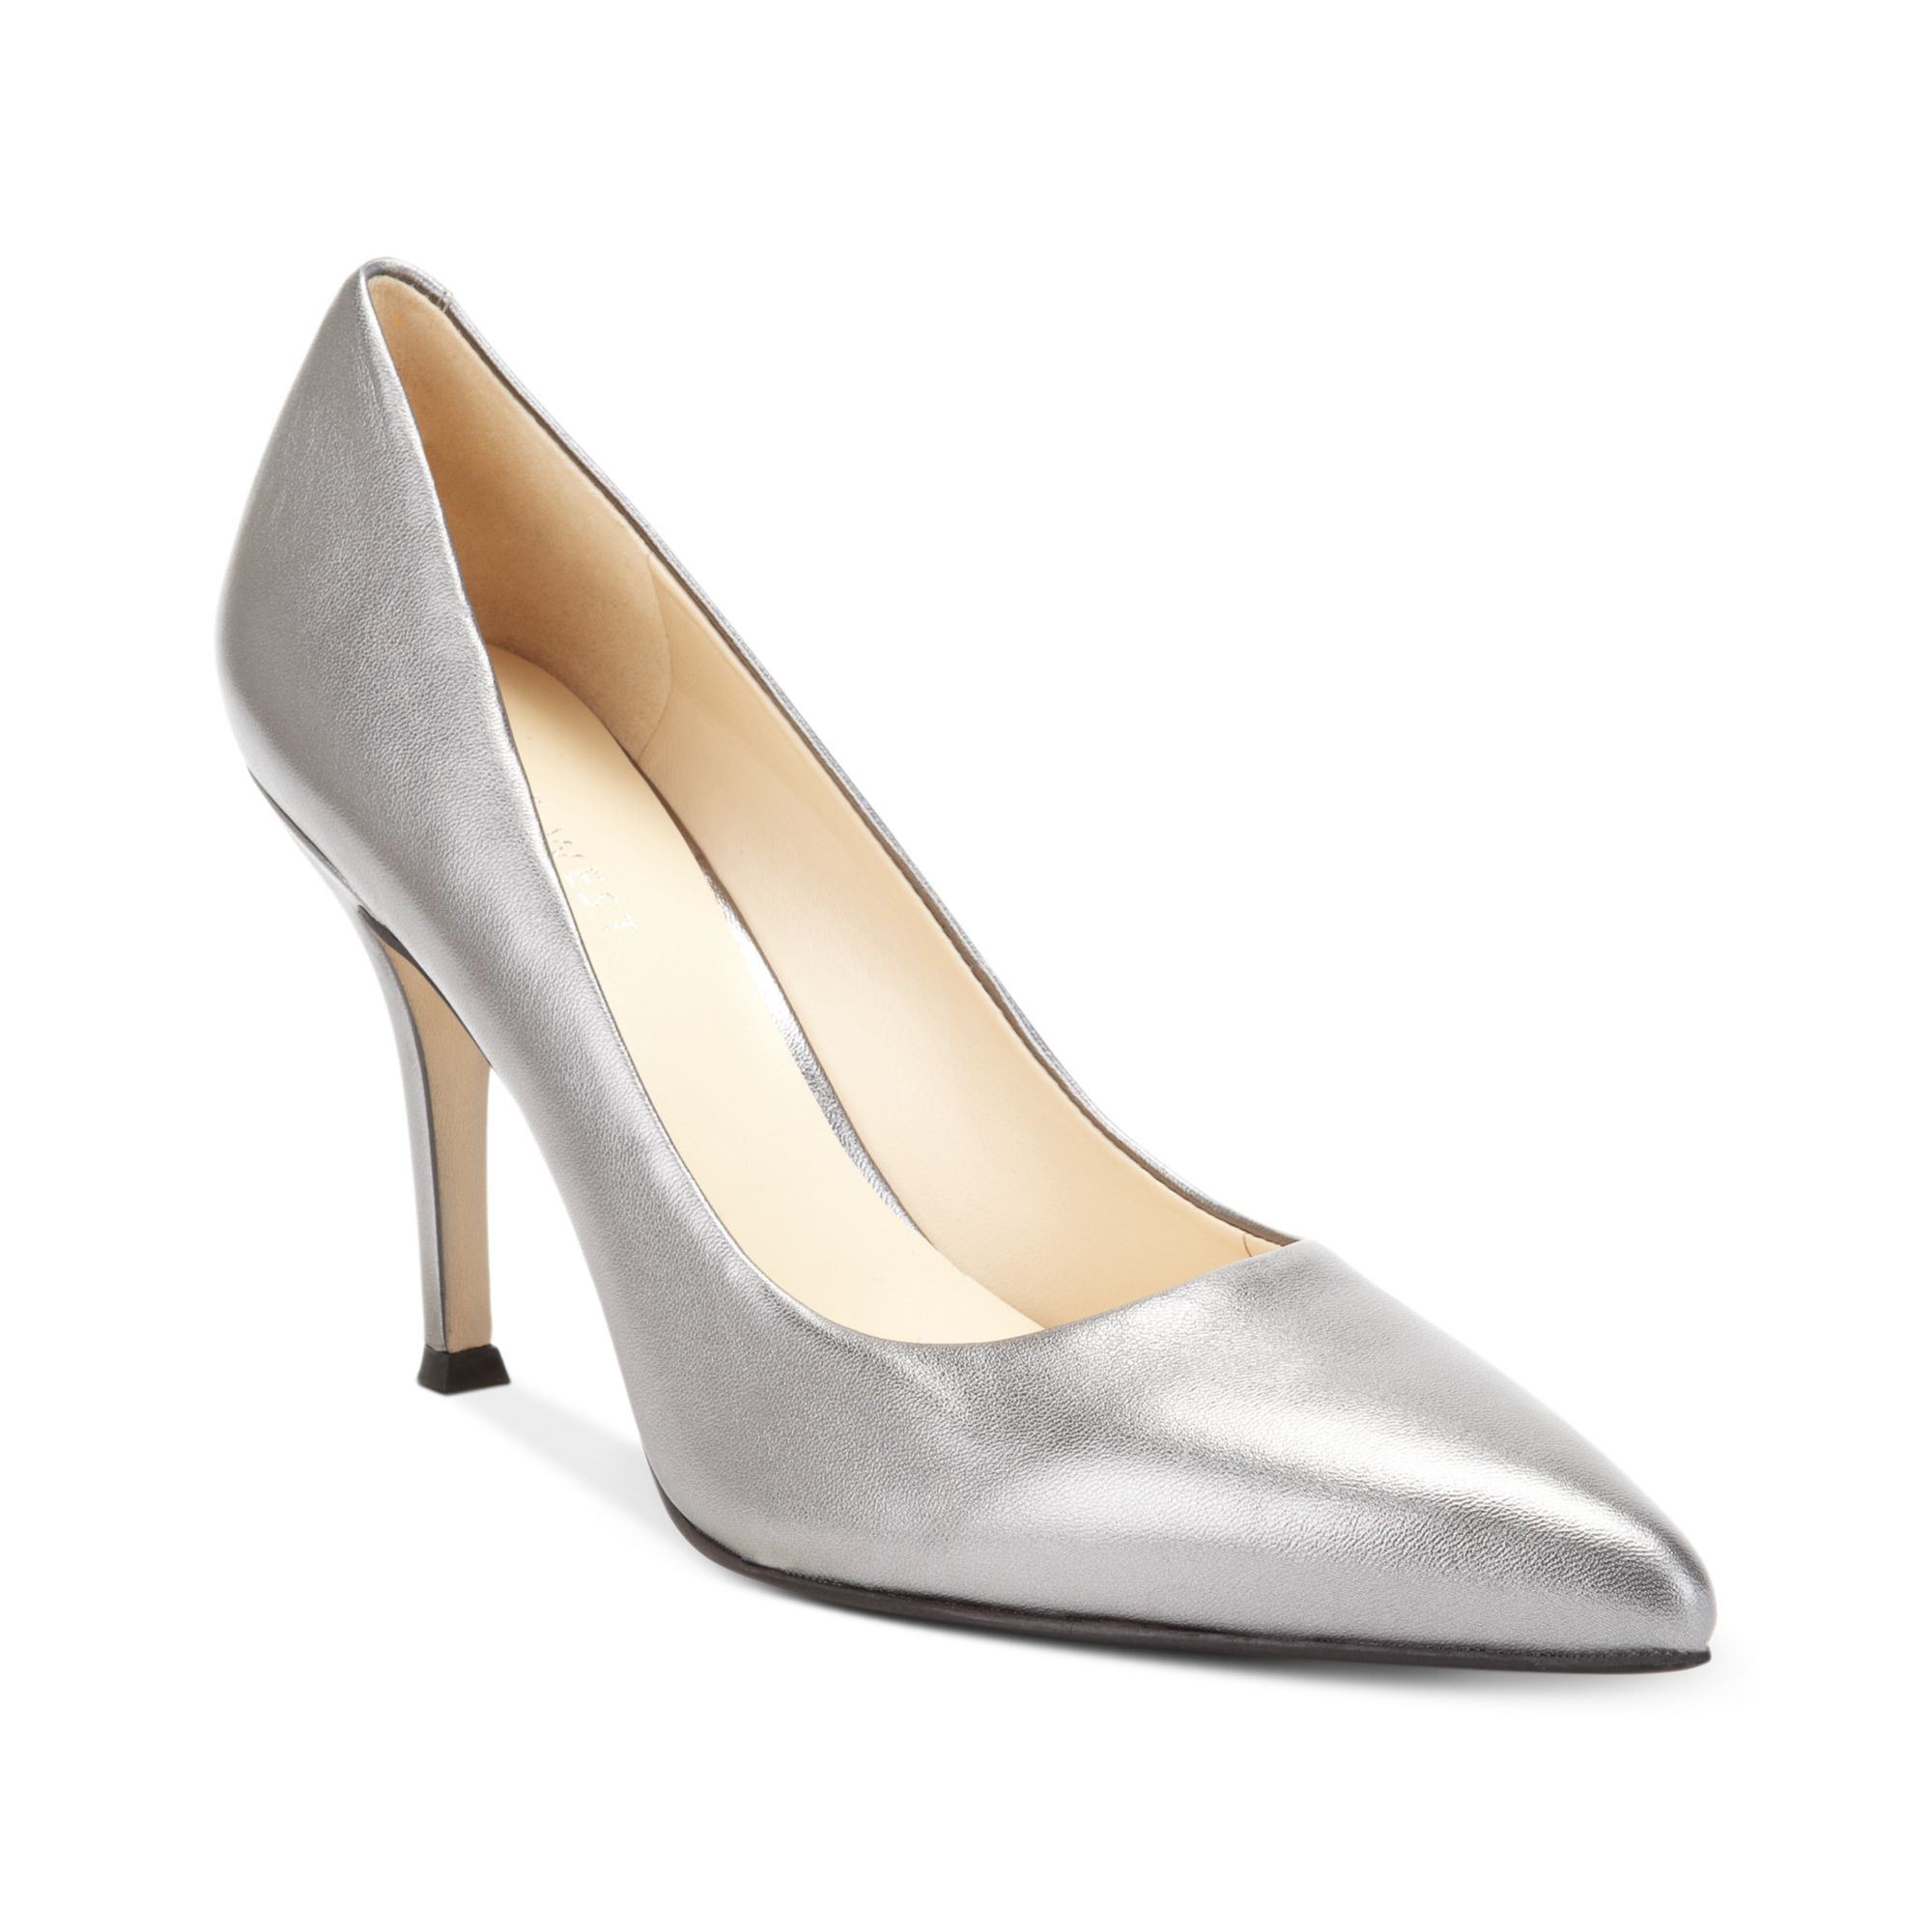 Nine West Flax Pumps in Silver (Pewter Leather) | Lyst